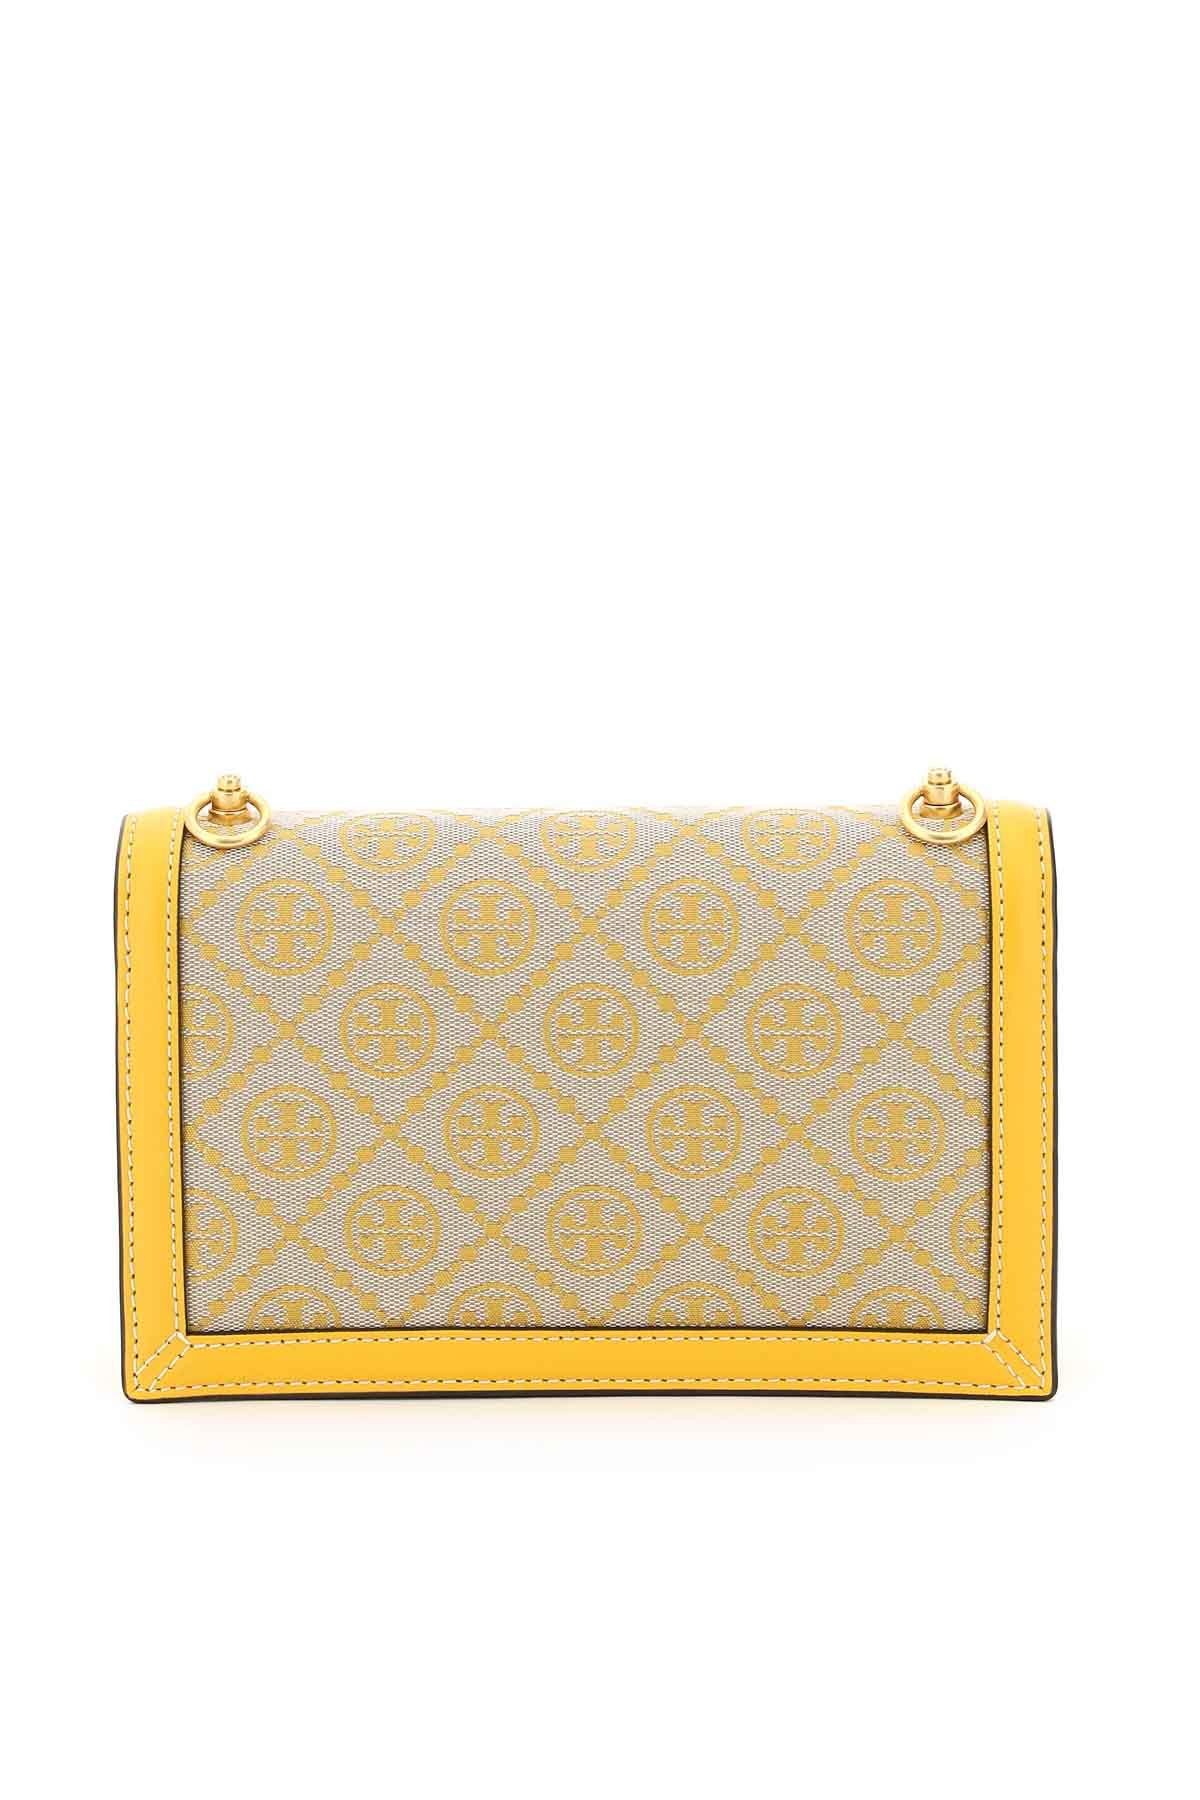 Tory Burch, Bags, Nwot Yellow Tory Burch T Monogram Jacquard Drawstring  Tote With Receipt